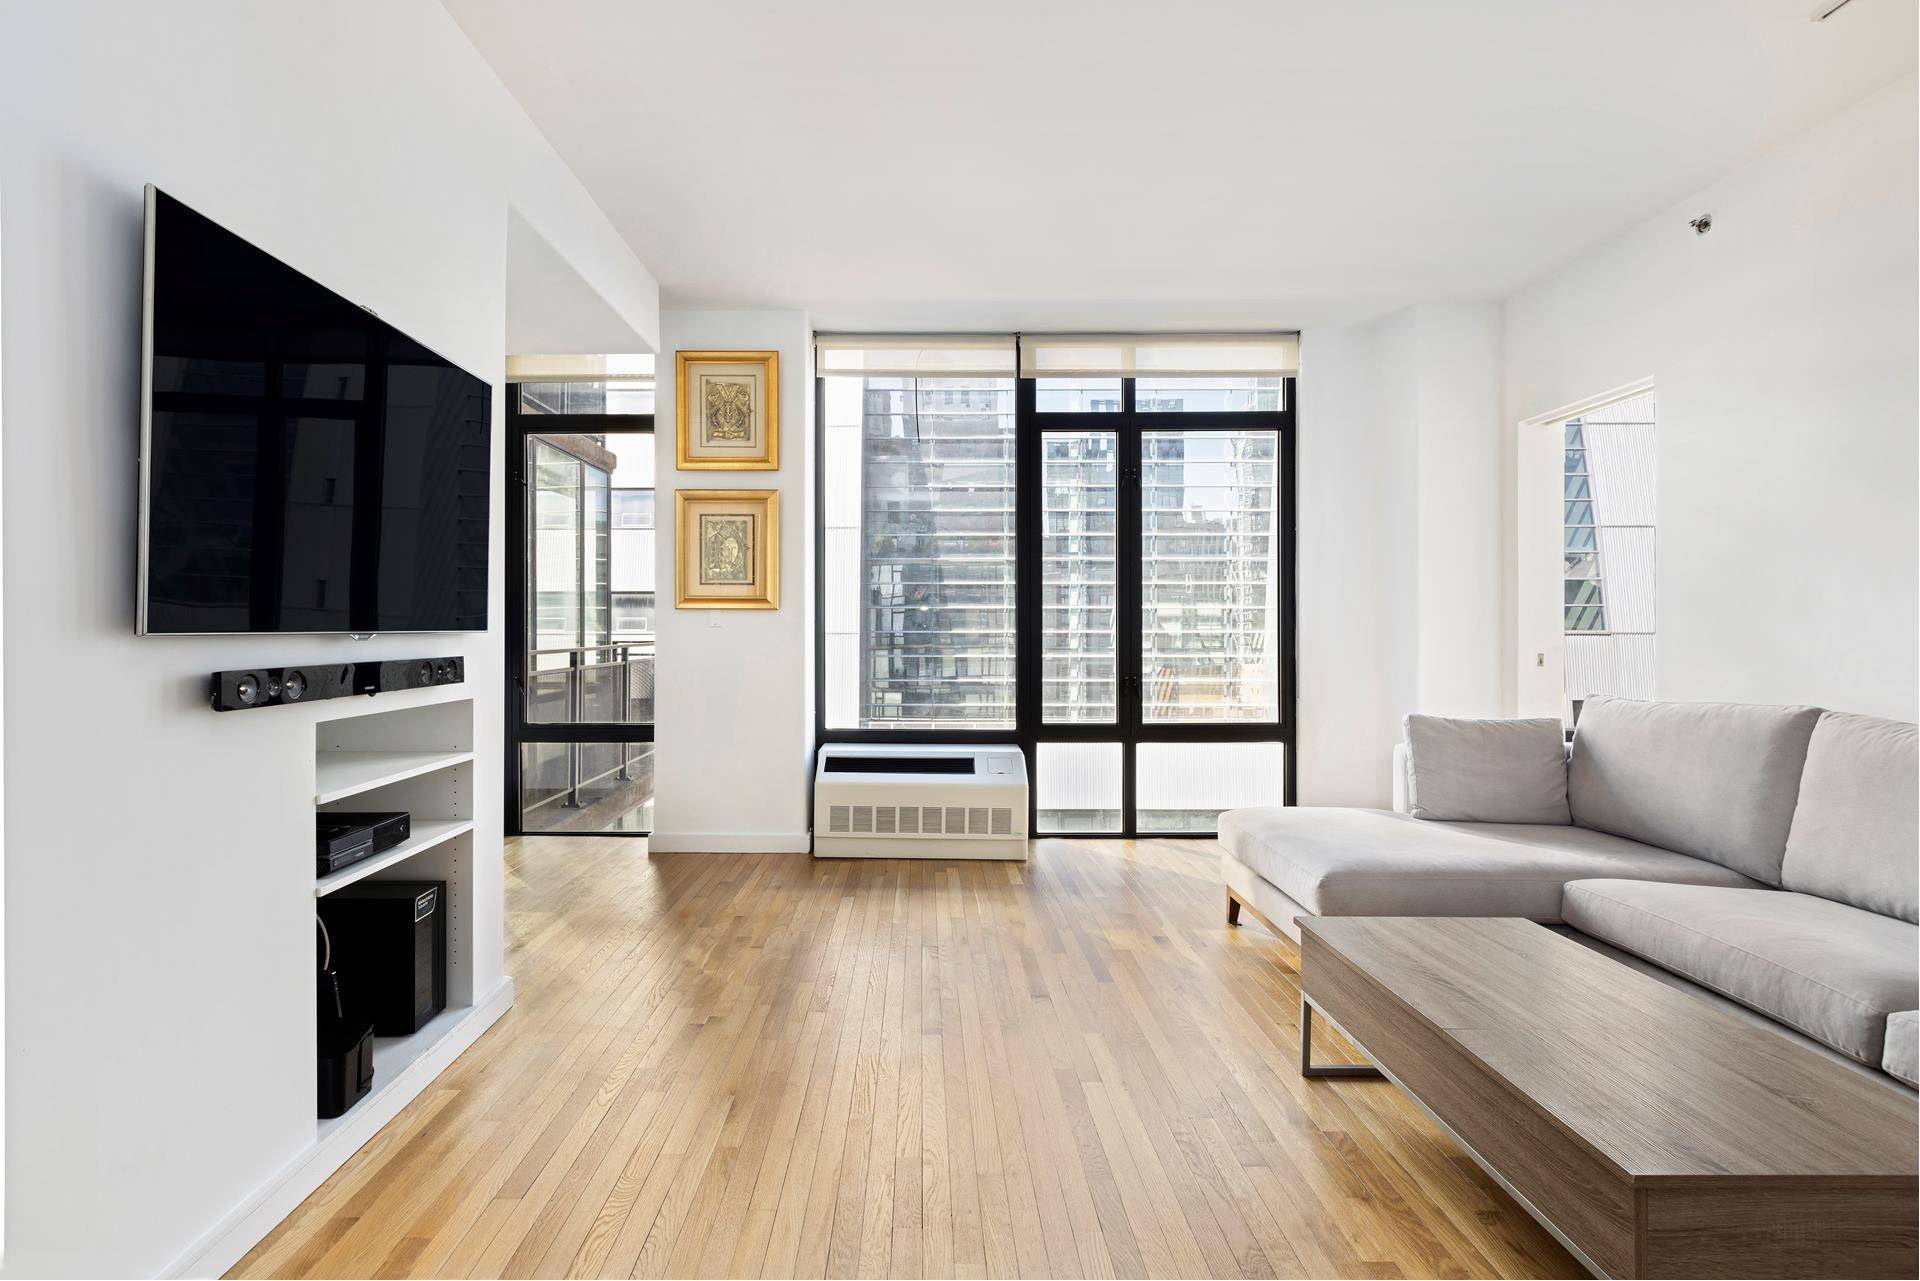 Welcome to One48 a luxury full service Condominium located at the crossroads of Gramercy, the Flatiron district and Nomad which are all fun and energetic neighborhoods.